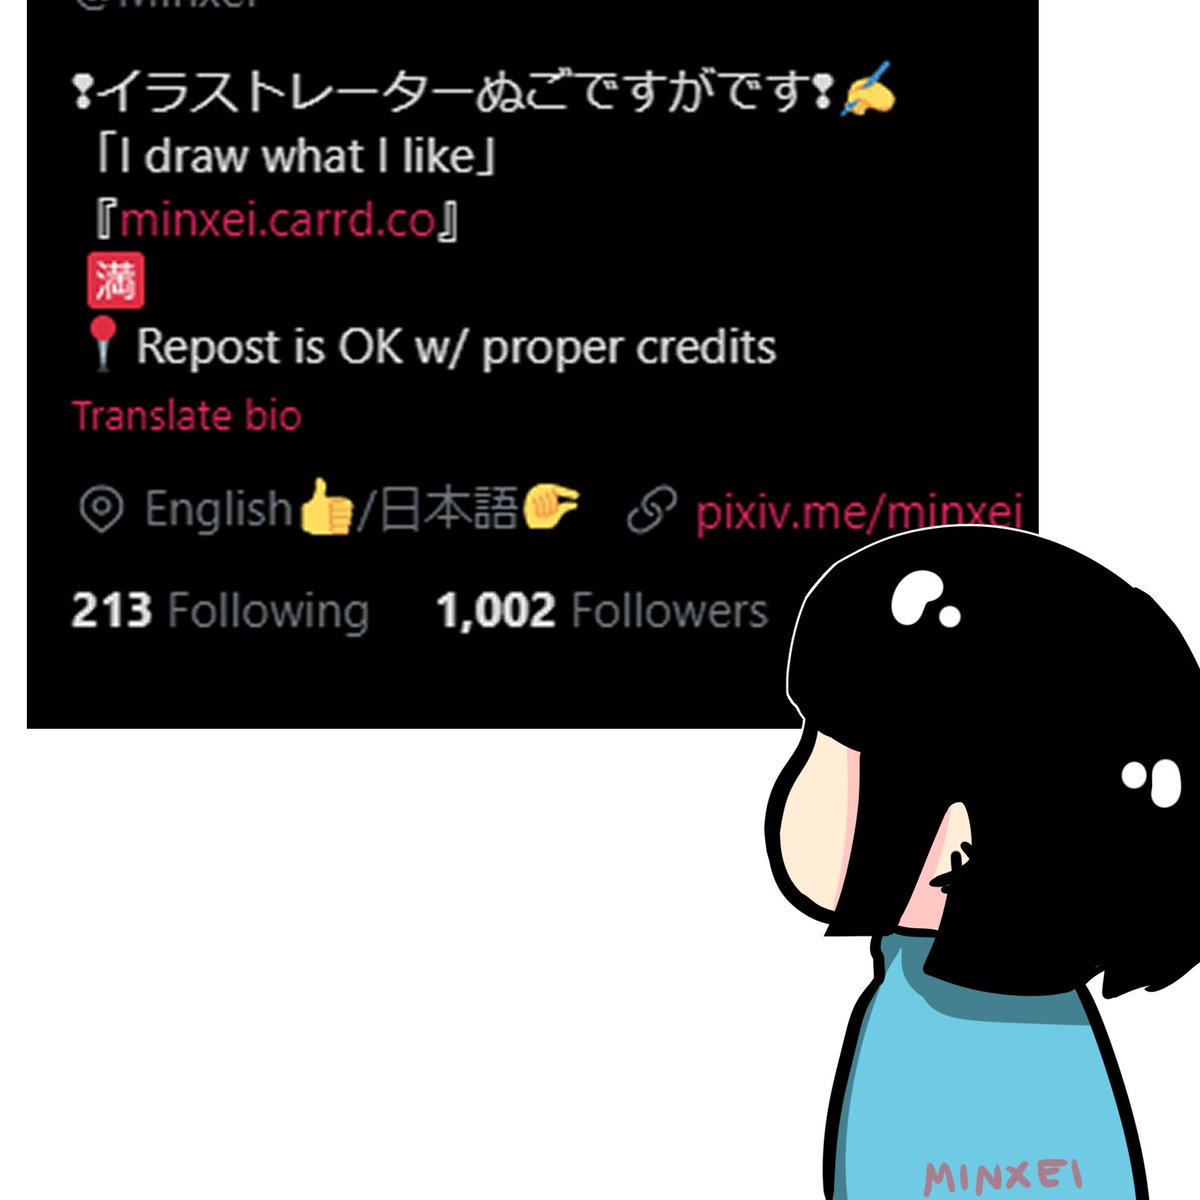 wOA (;'༎ຶٹ༎ຶ`) 

Thank you for 1k
Stay tuned for an

▓▒░ 𝗮𝗿𝘁 𝗴𝗶𝘃𝗲𝗮𝘄𝗮𝘆 ░▒▓

ε=ε=ε=ε=┌(;‾▽‾)┘ I'm going to make a poster real quick 